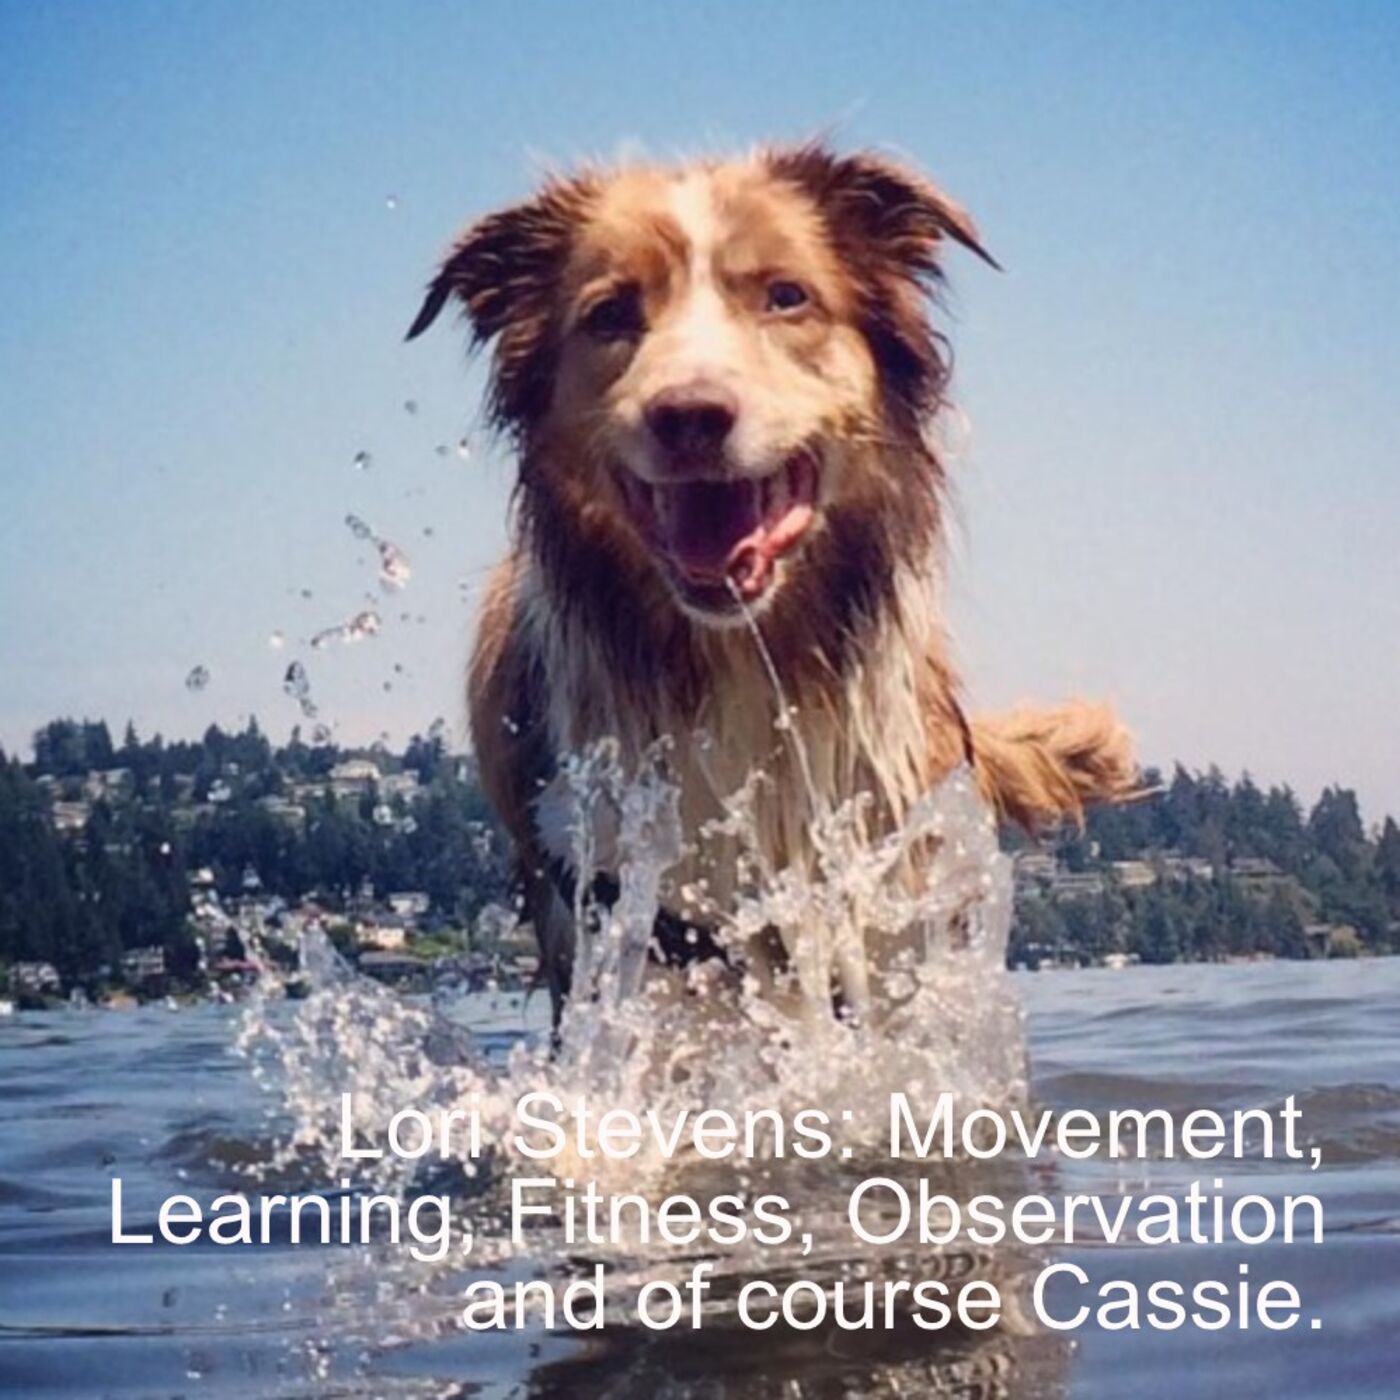 Lori Stevens Movement, Learning, Fitness, Observation and of course Cassie.